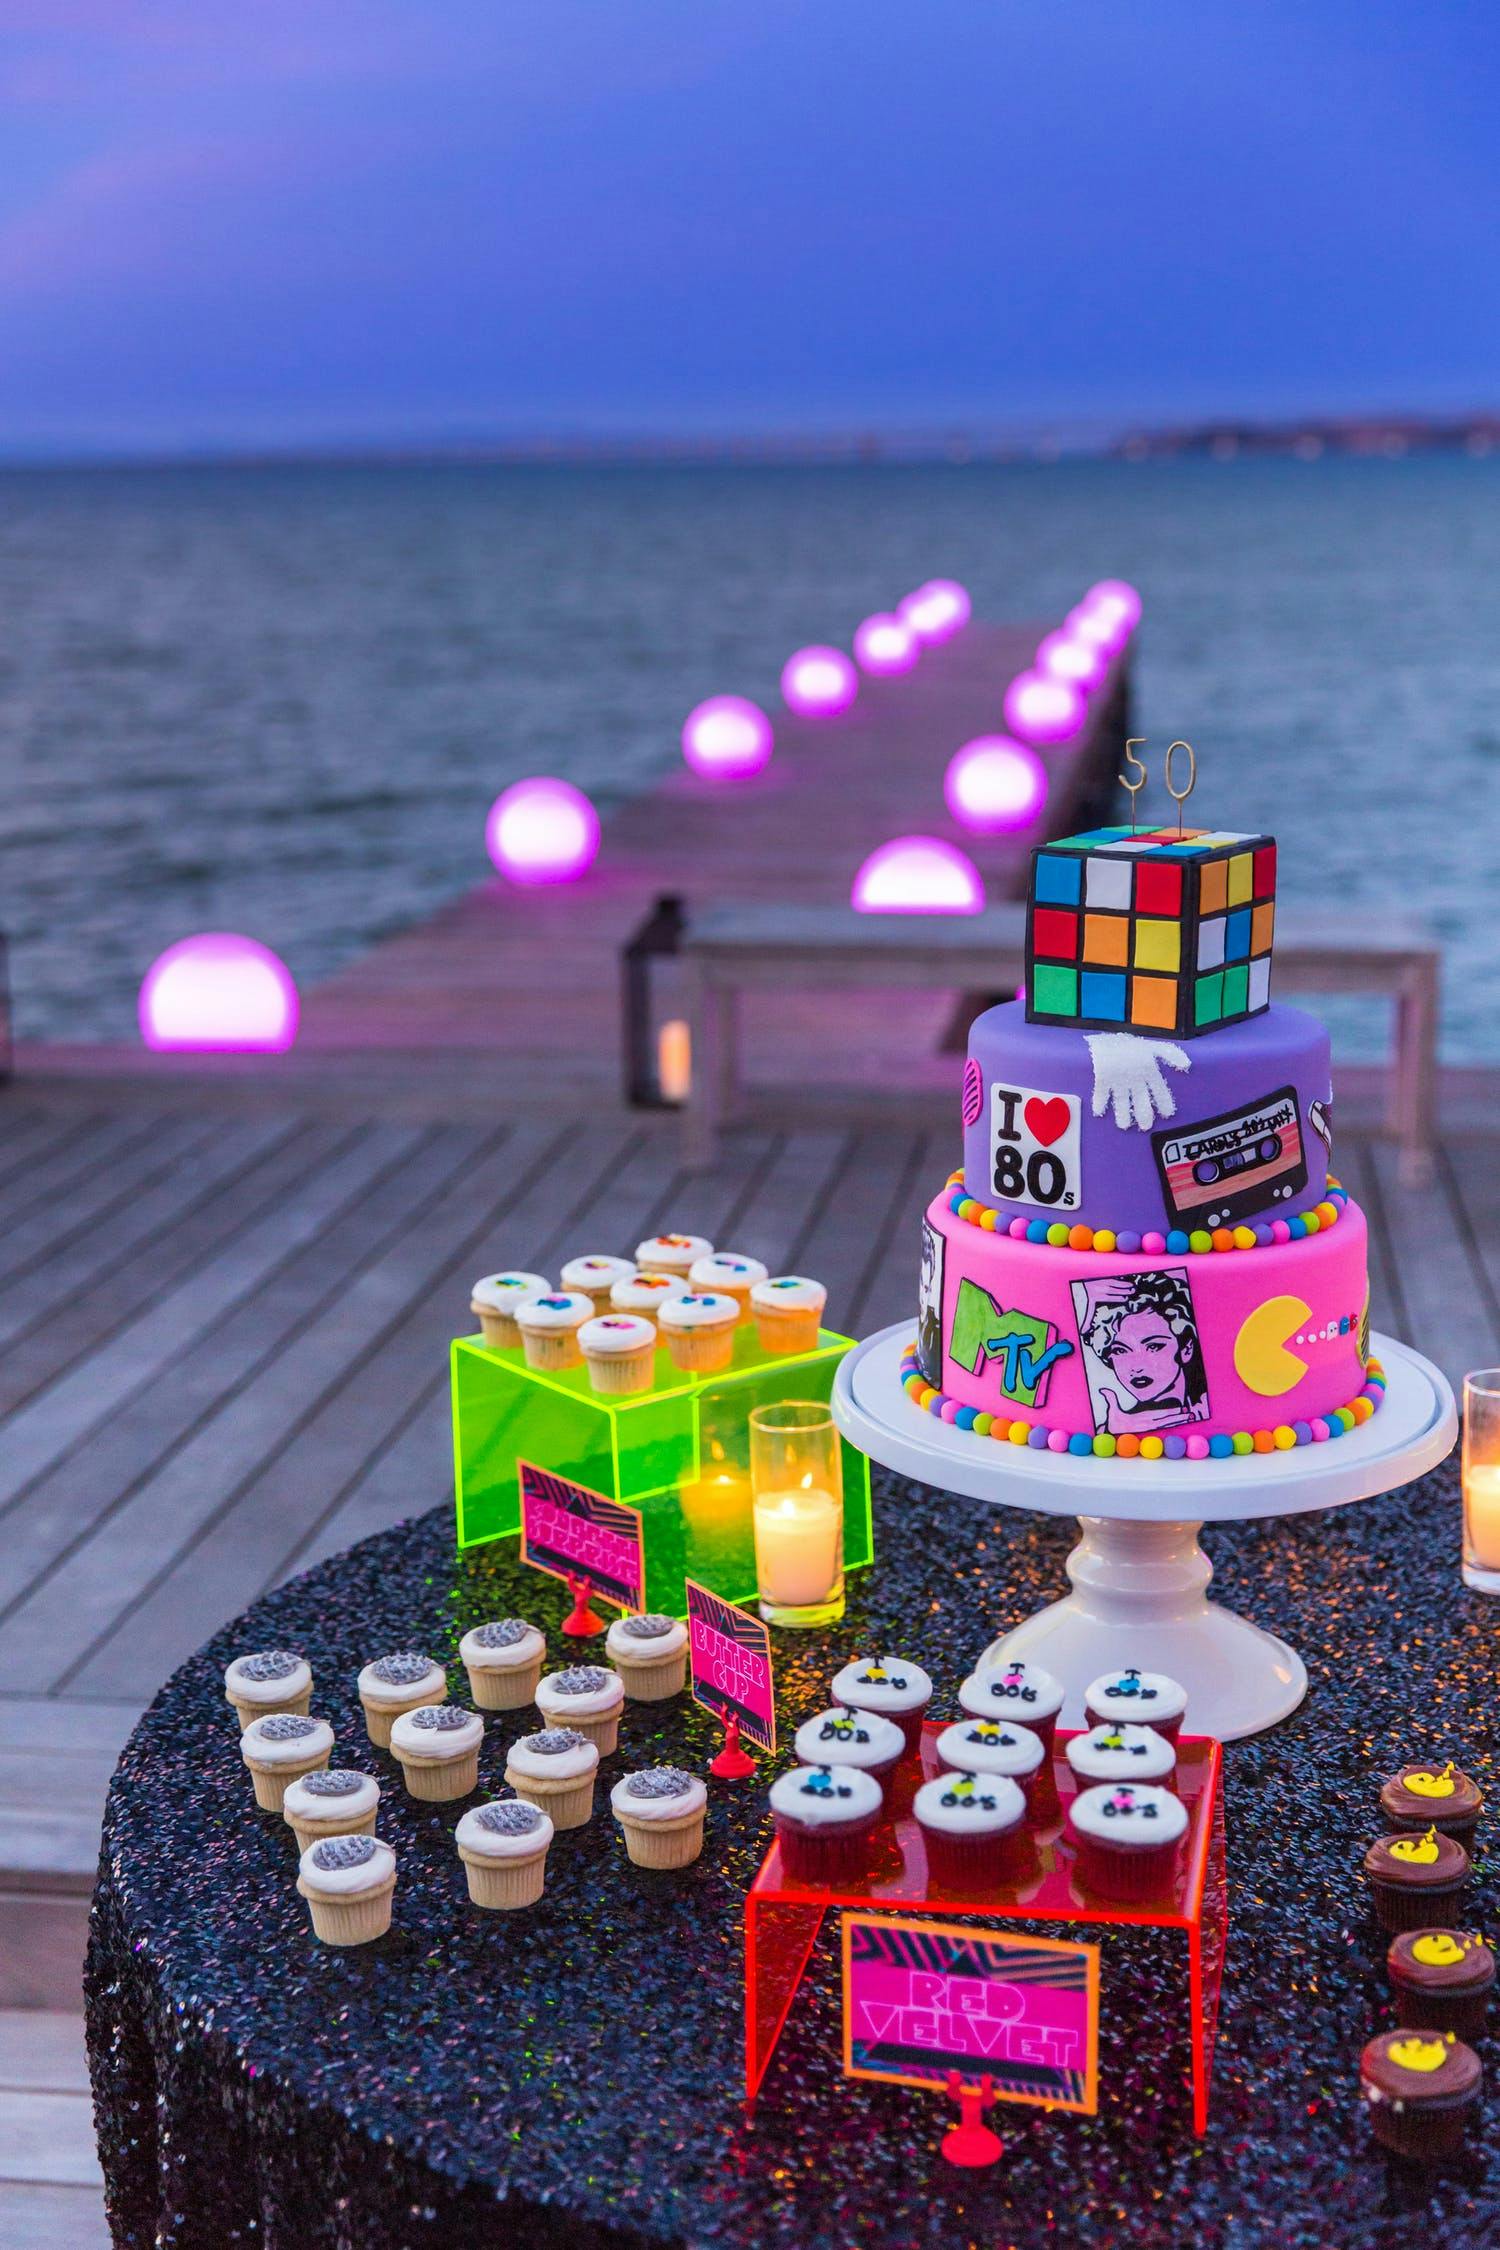 Rubik's cube topped cake with pac man theme cupcakes 2021 trend | PartySlate